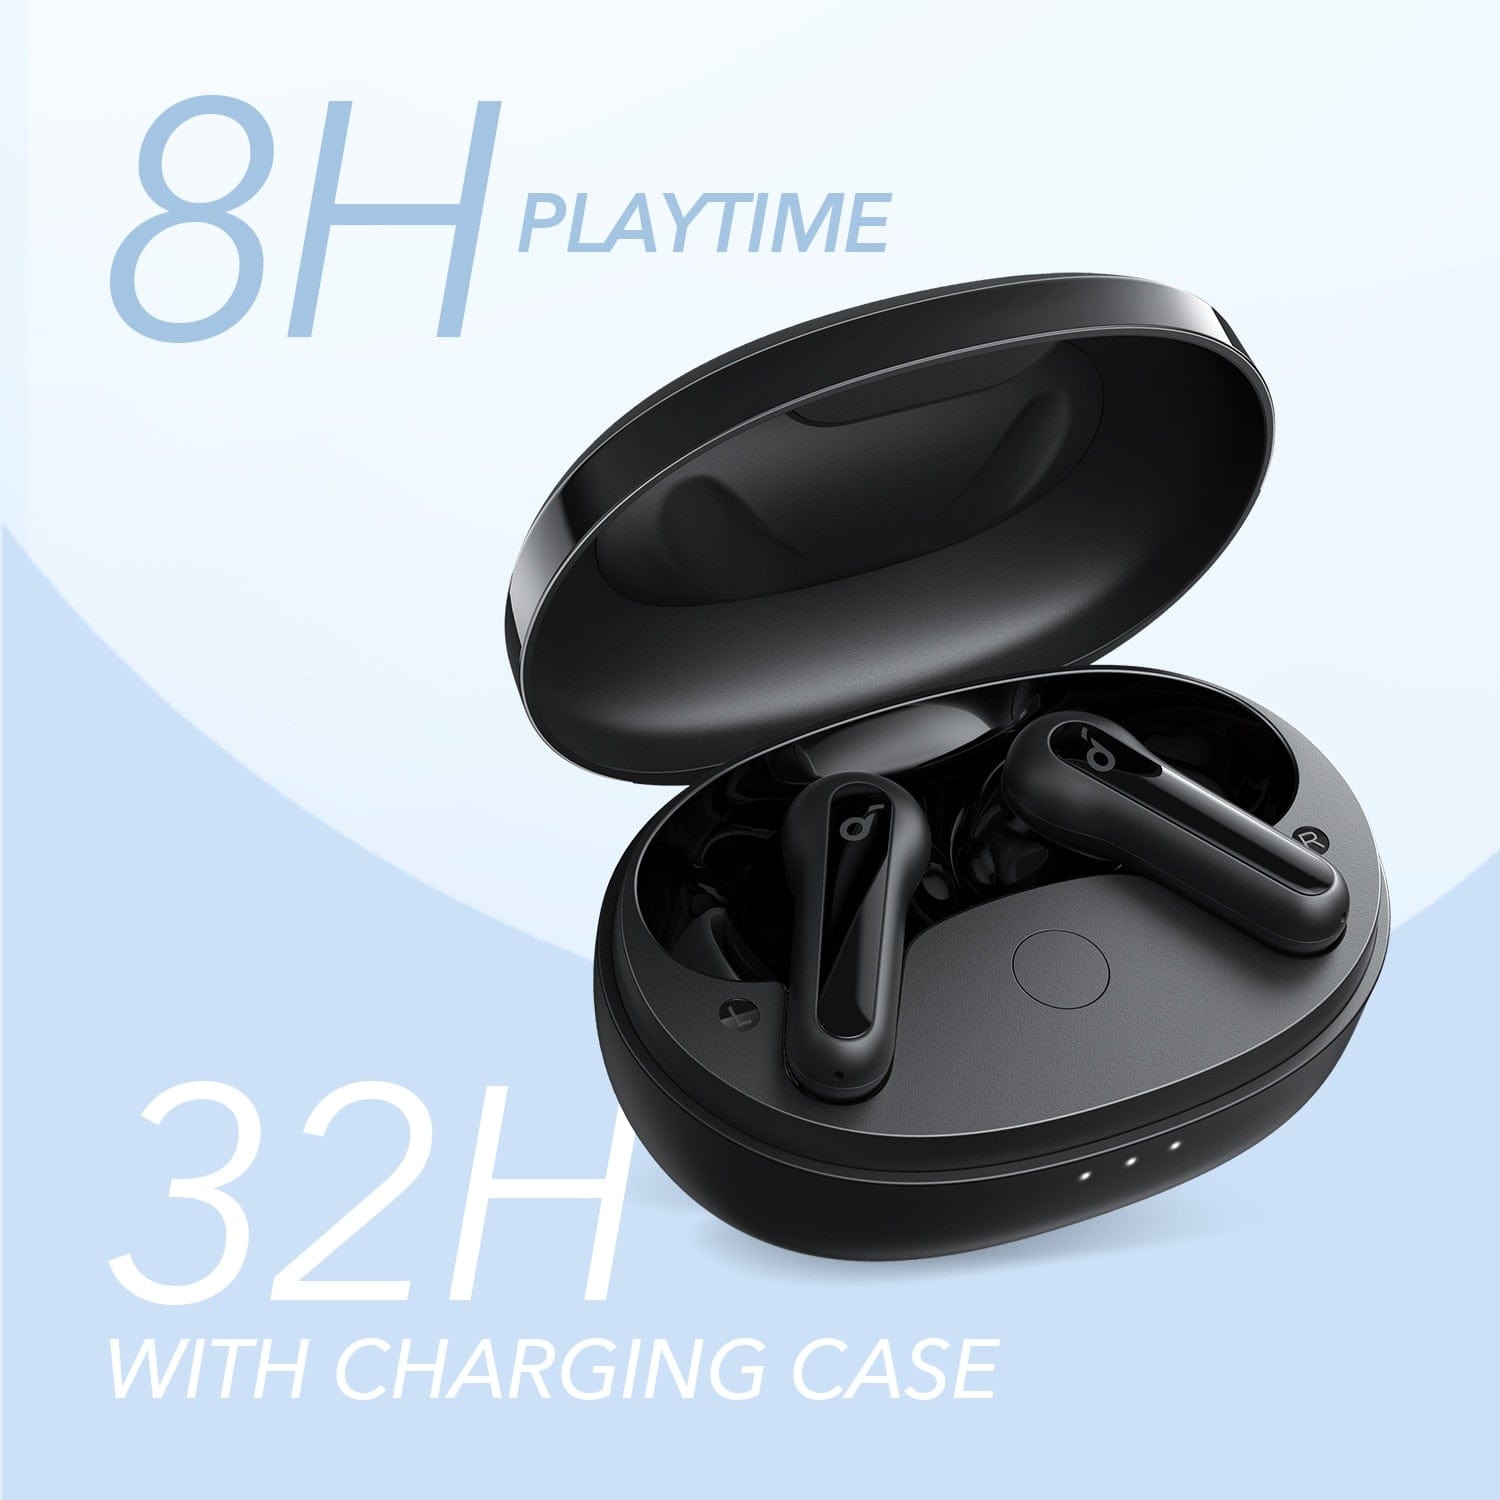 Soundcore Soundcore, Wireless Earbuds, Version Life P2 Mini True, Supports Bluetooth 5.2, Playtime up to 32 Hours, Color Black